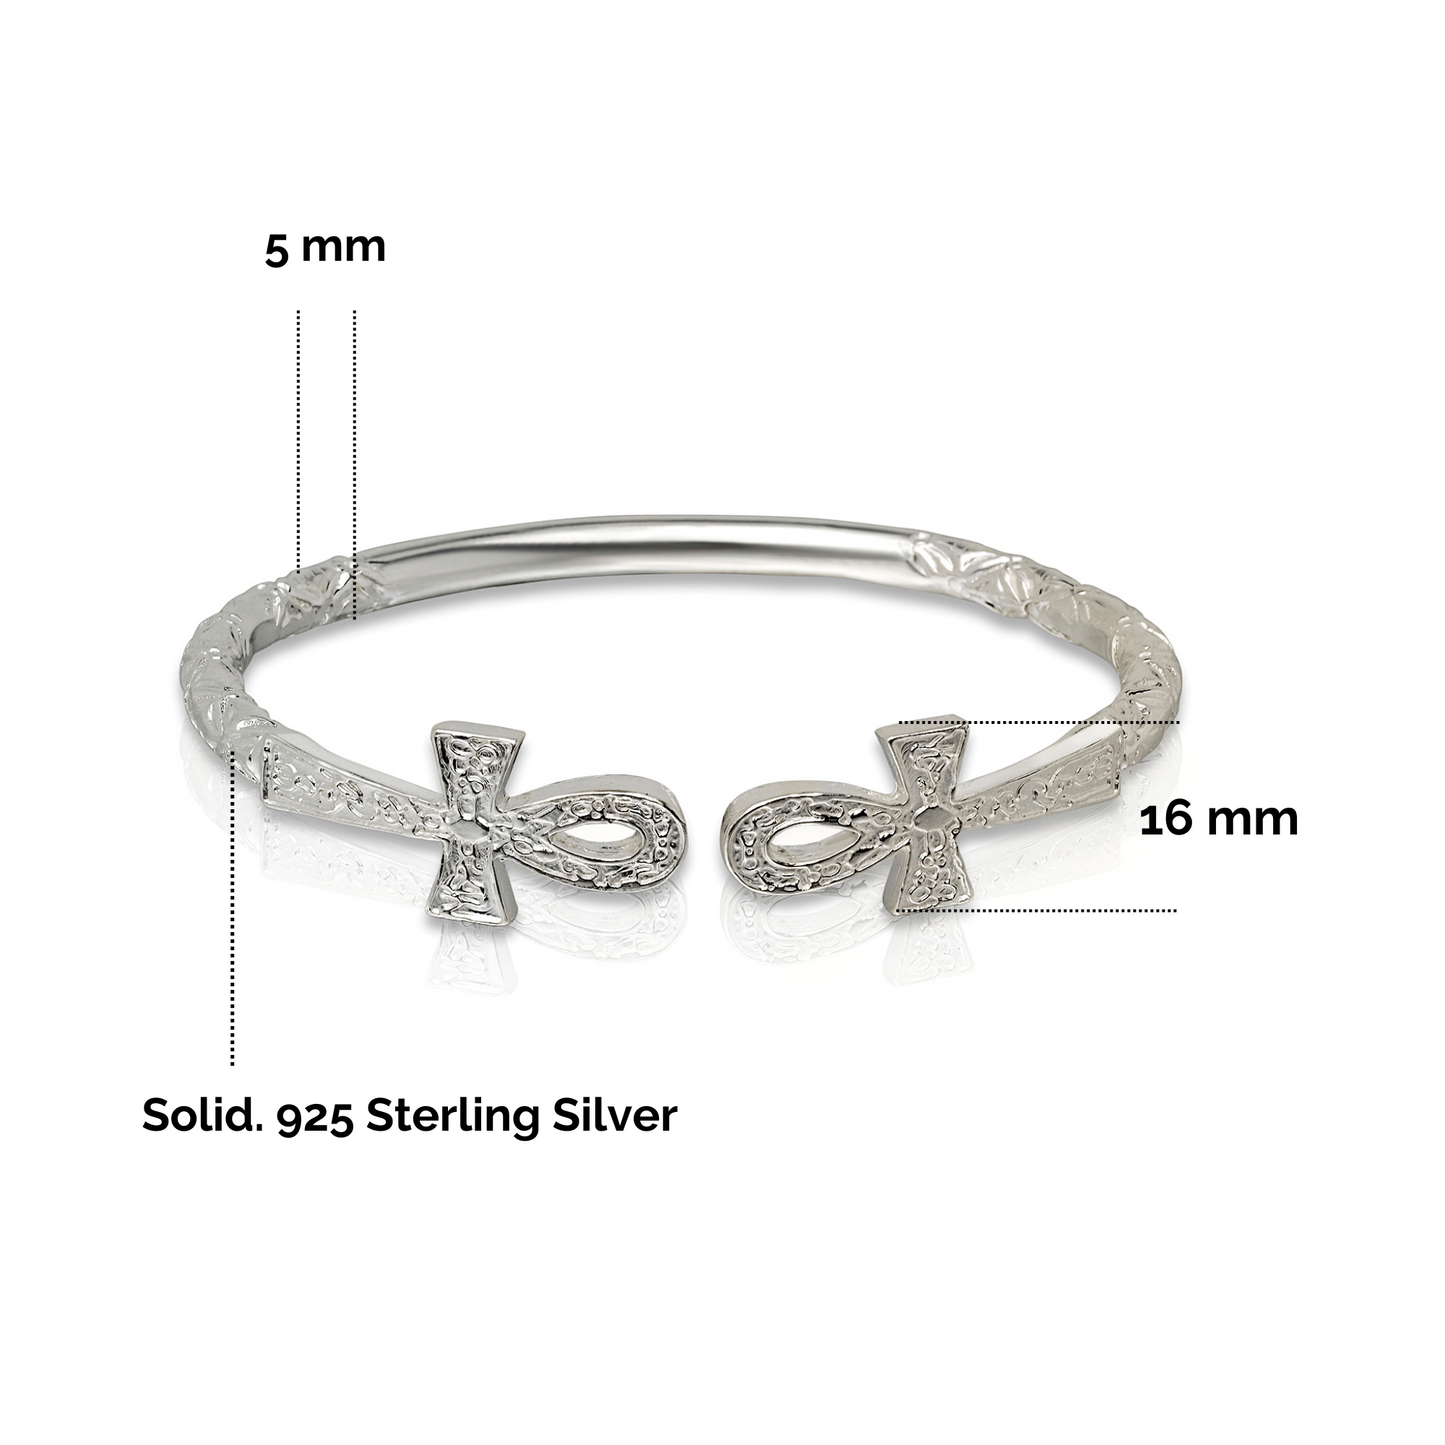 Better Jewelry Solid .925 West Indian Silver Bangle with Large Ankh Cross Ends, 1 piece